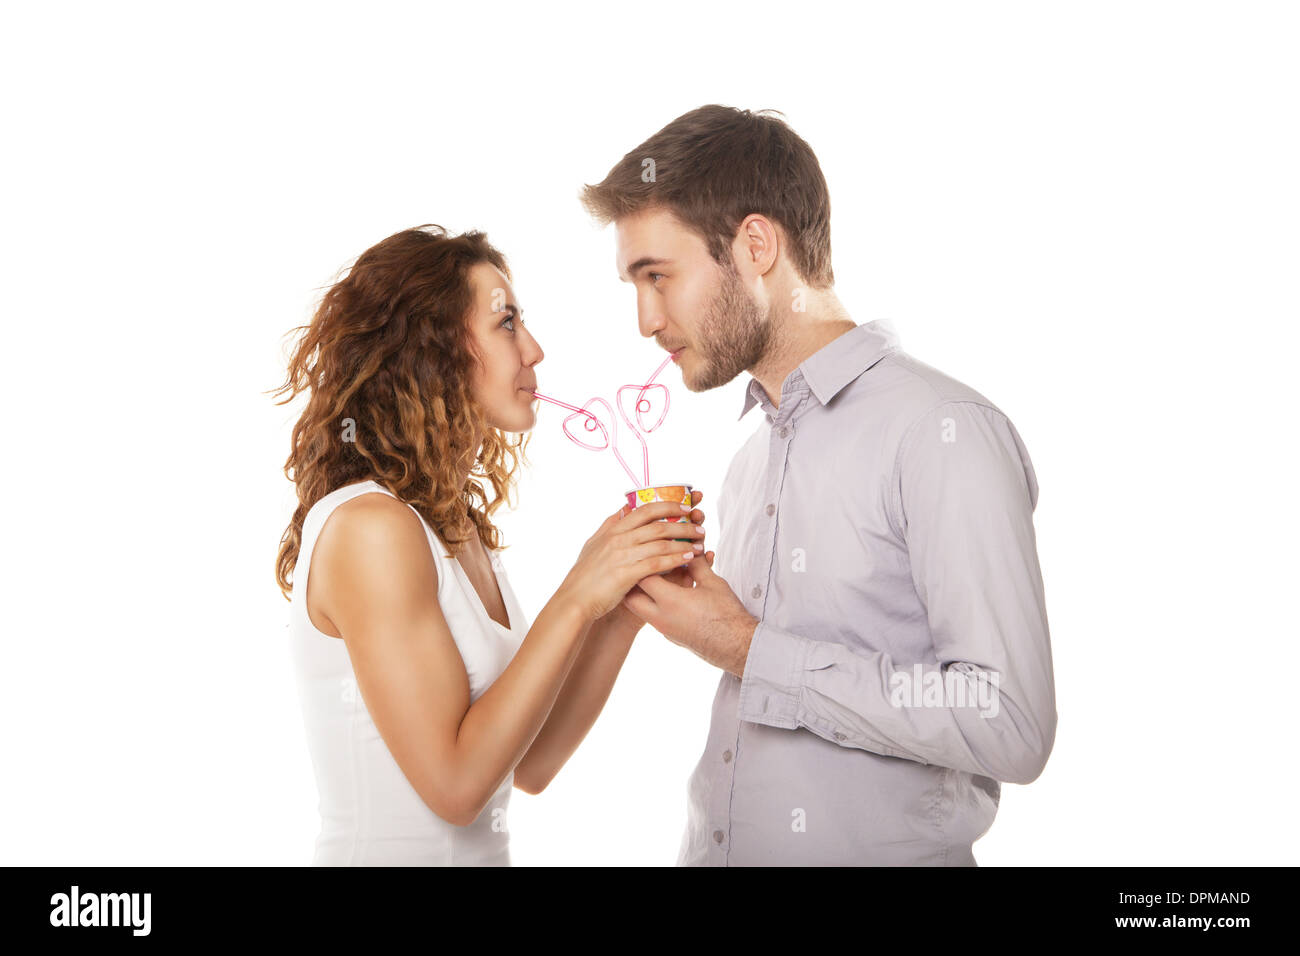 couple in love drink from the same glass isolated on white Stock Photo